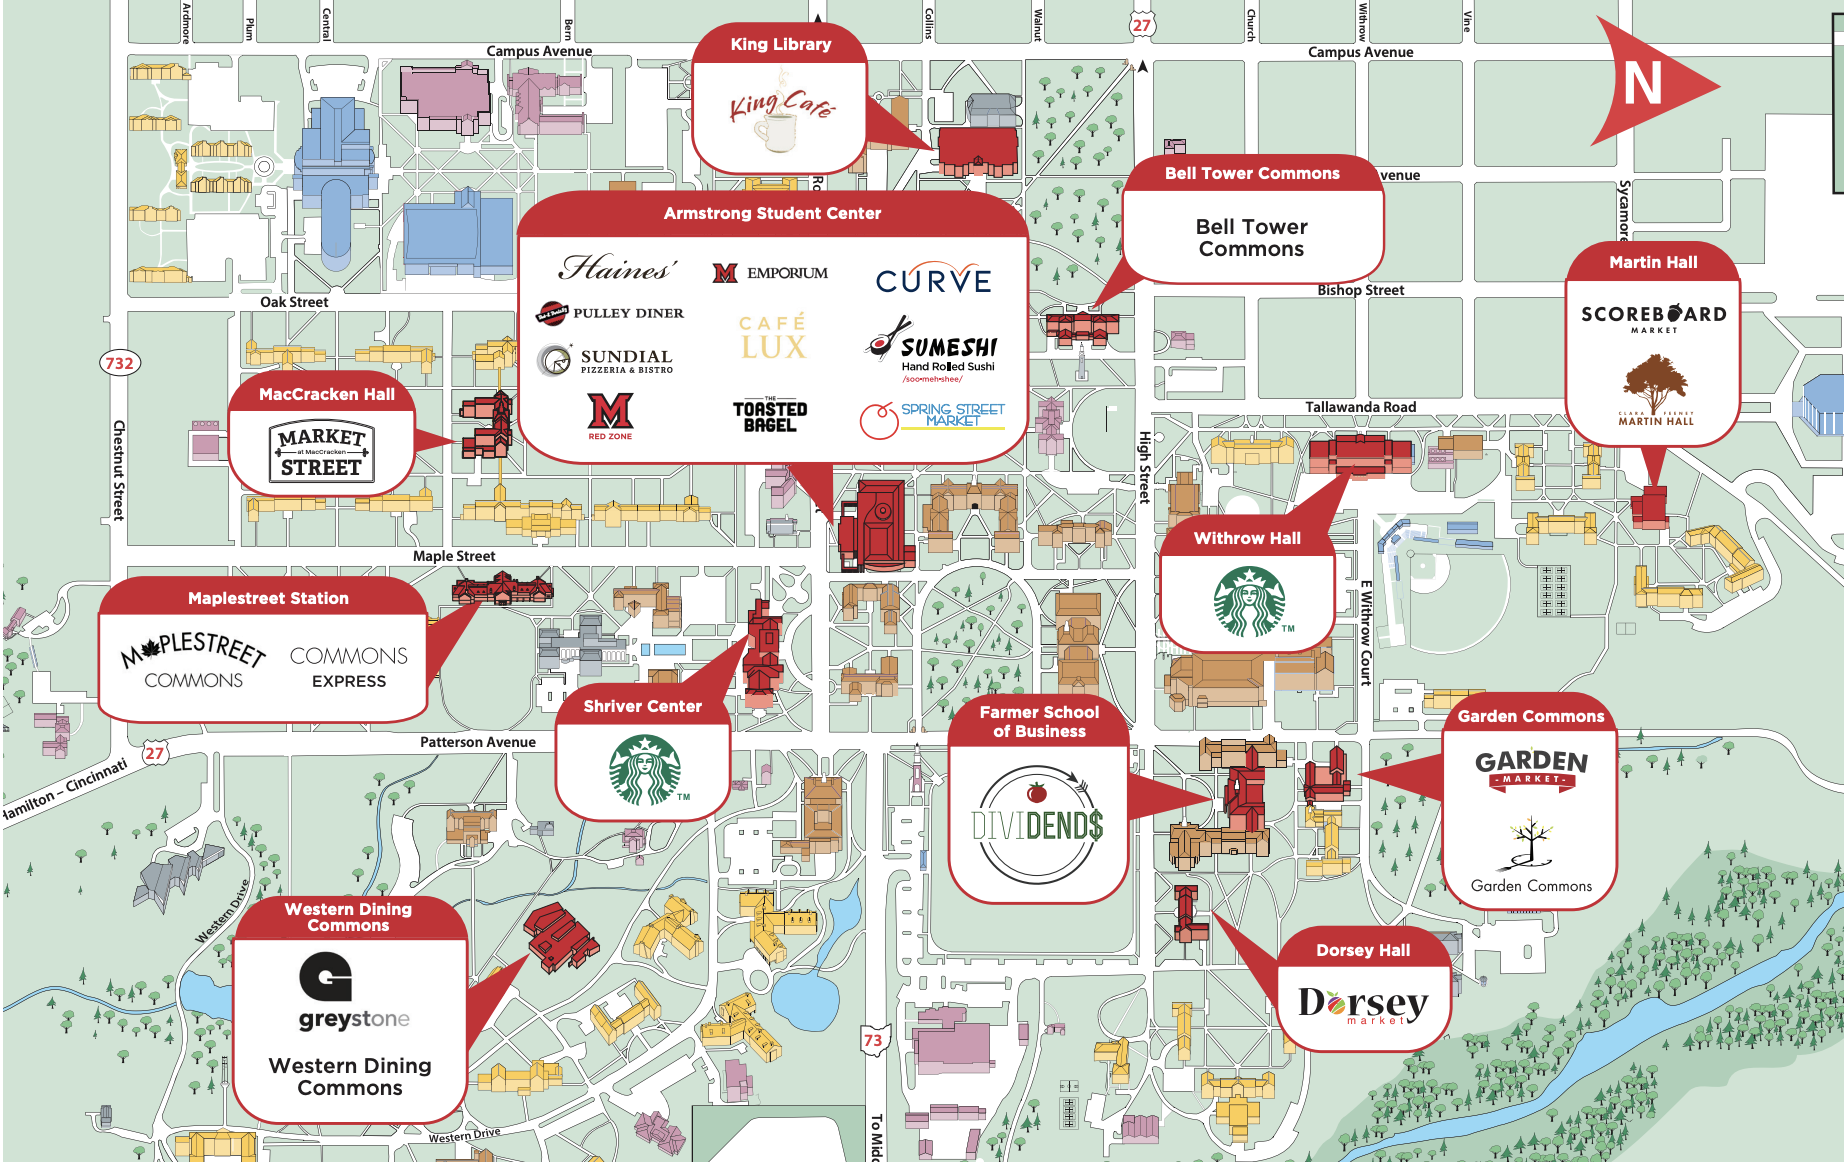 Dining locations shown on a map of Oxford's campus